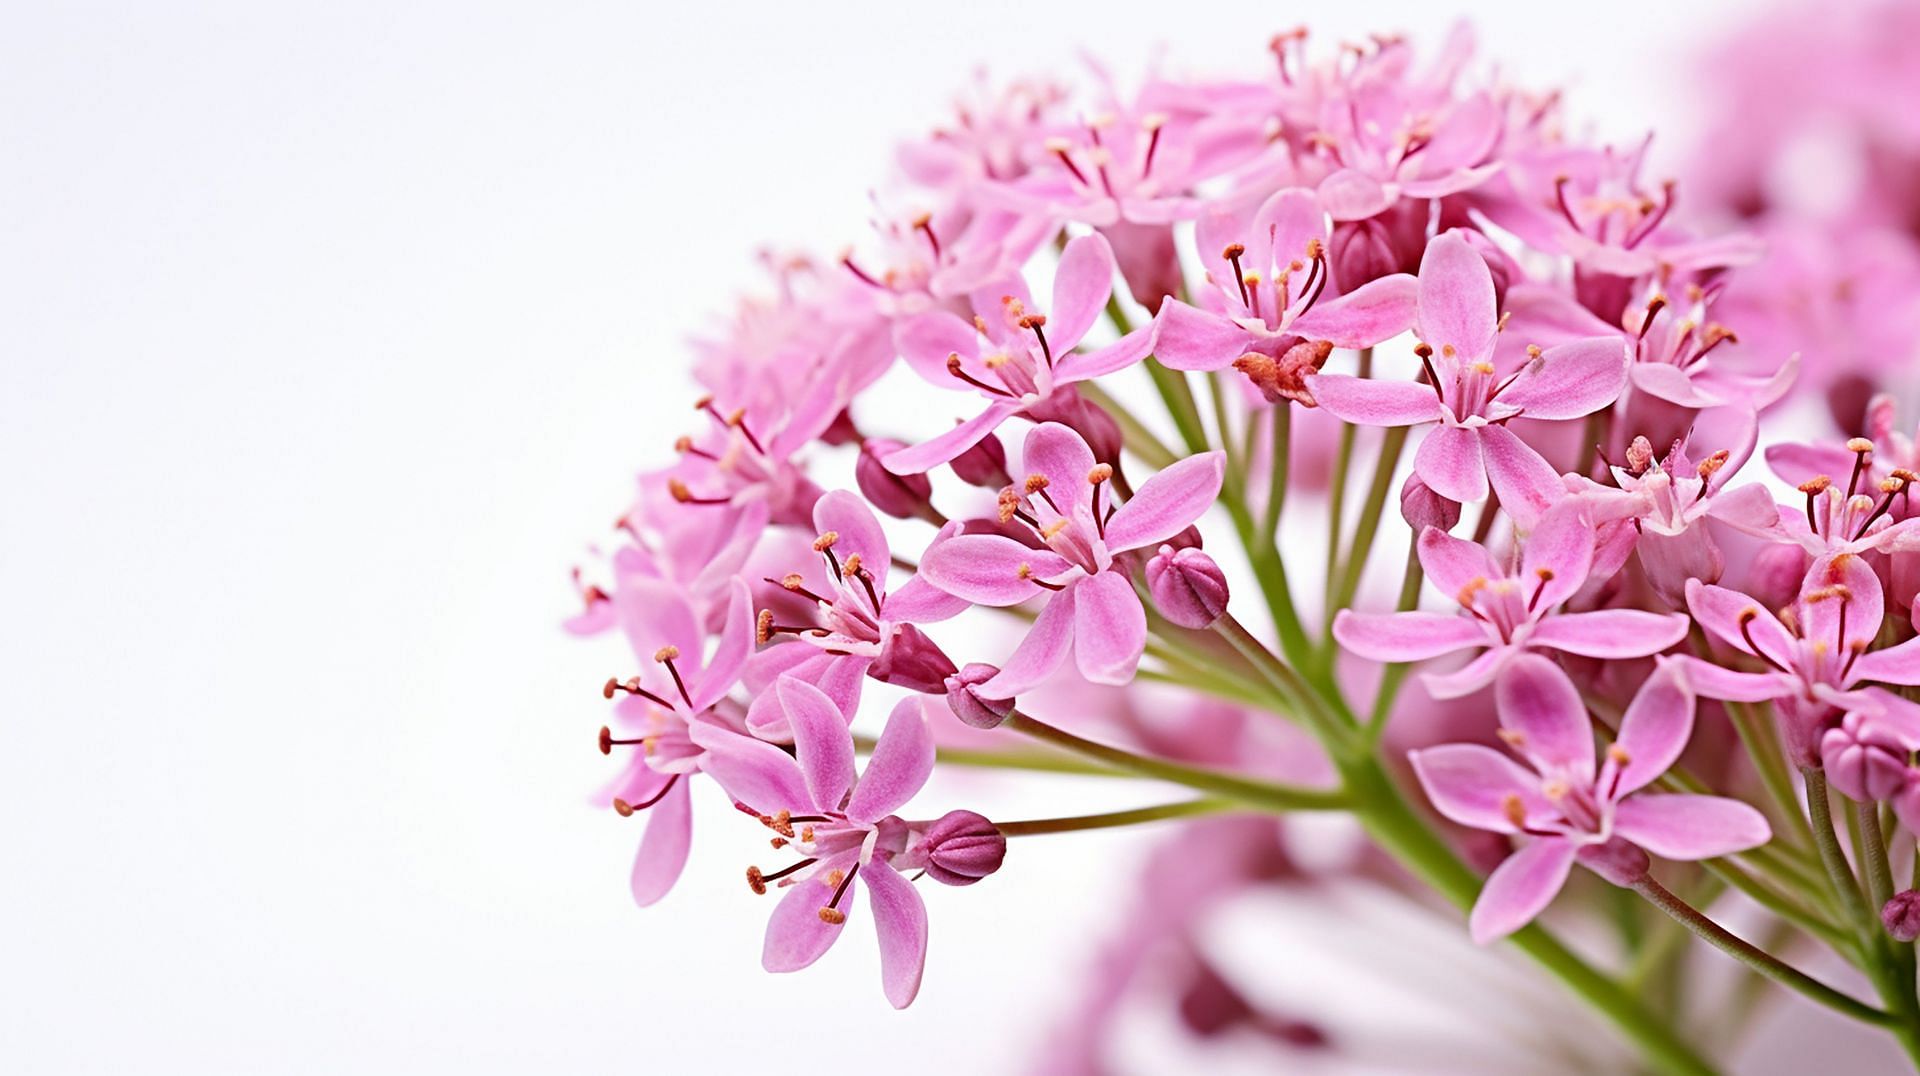 Valerian flower and root. (Image via Vecteezy/ Mou Fau)